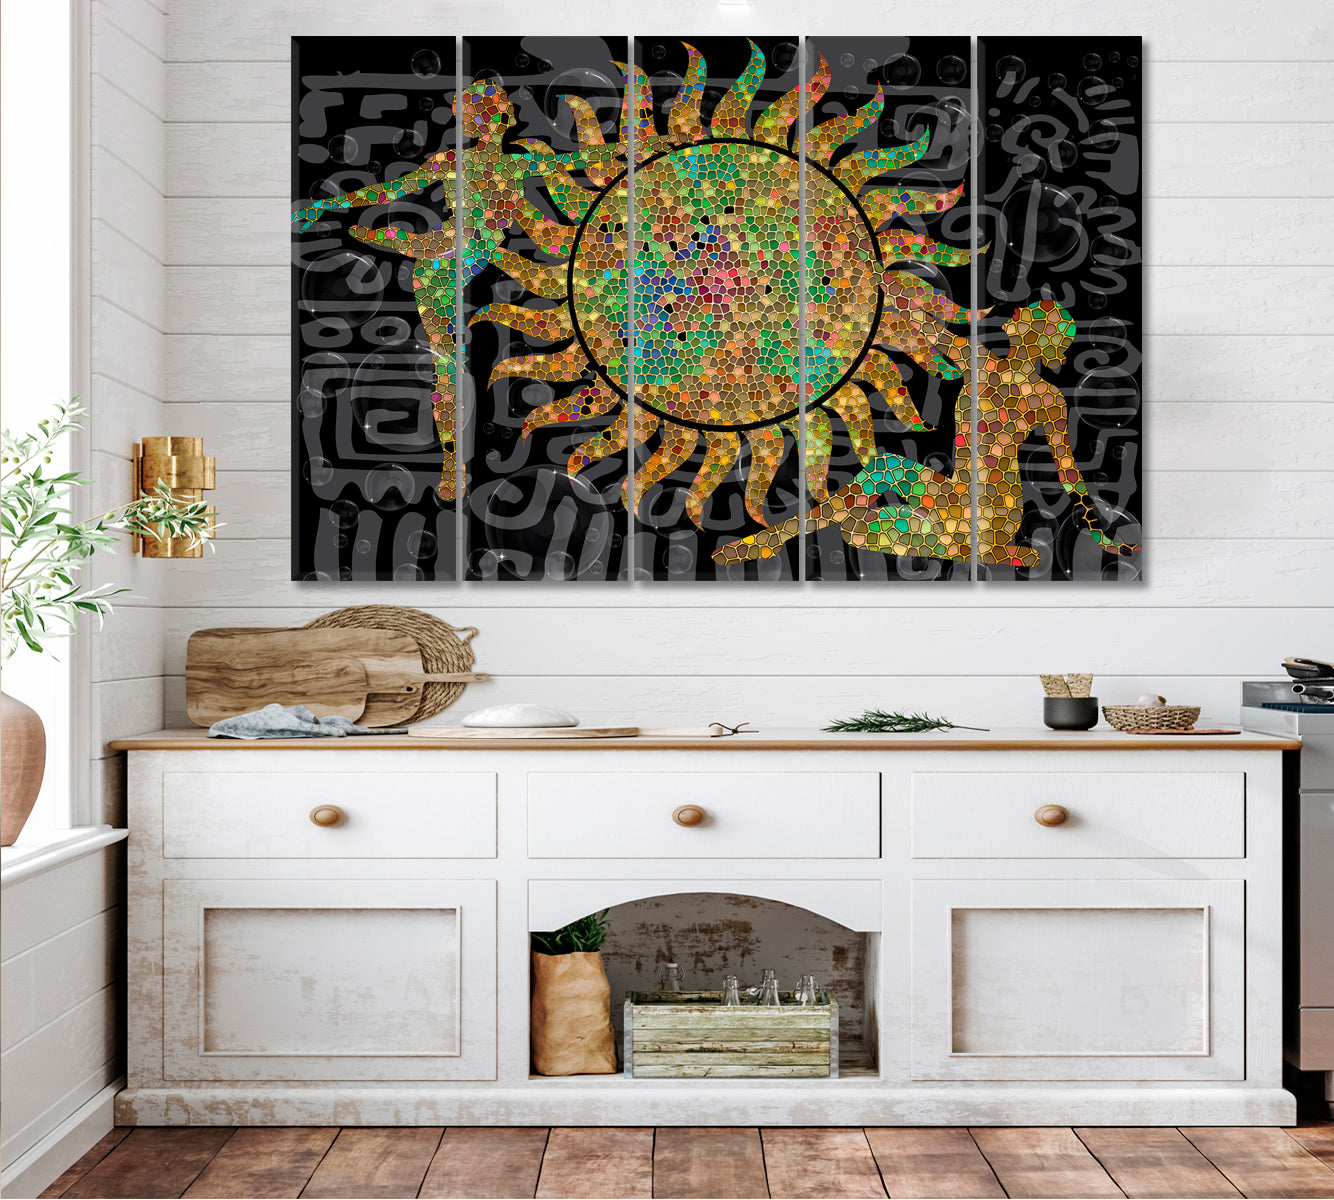 SOLAR ENERGY Constructive Abstract Figurative Boho Pattern Collage Contemporary Art Artesty 5 panels 36" x 24" 